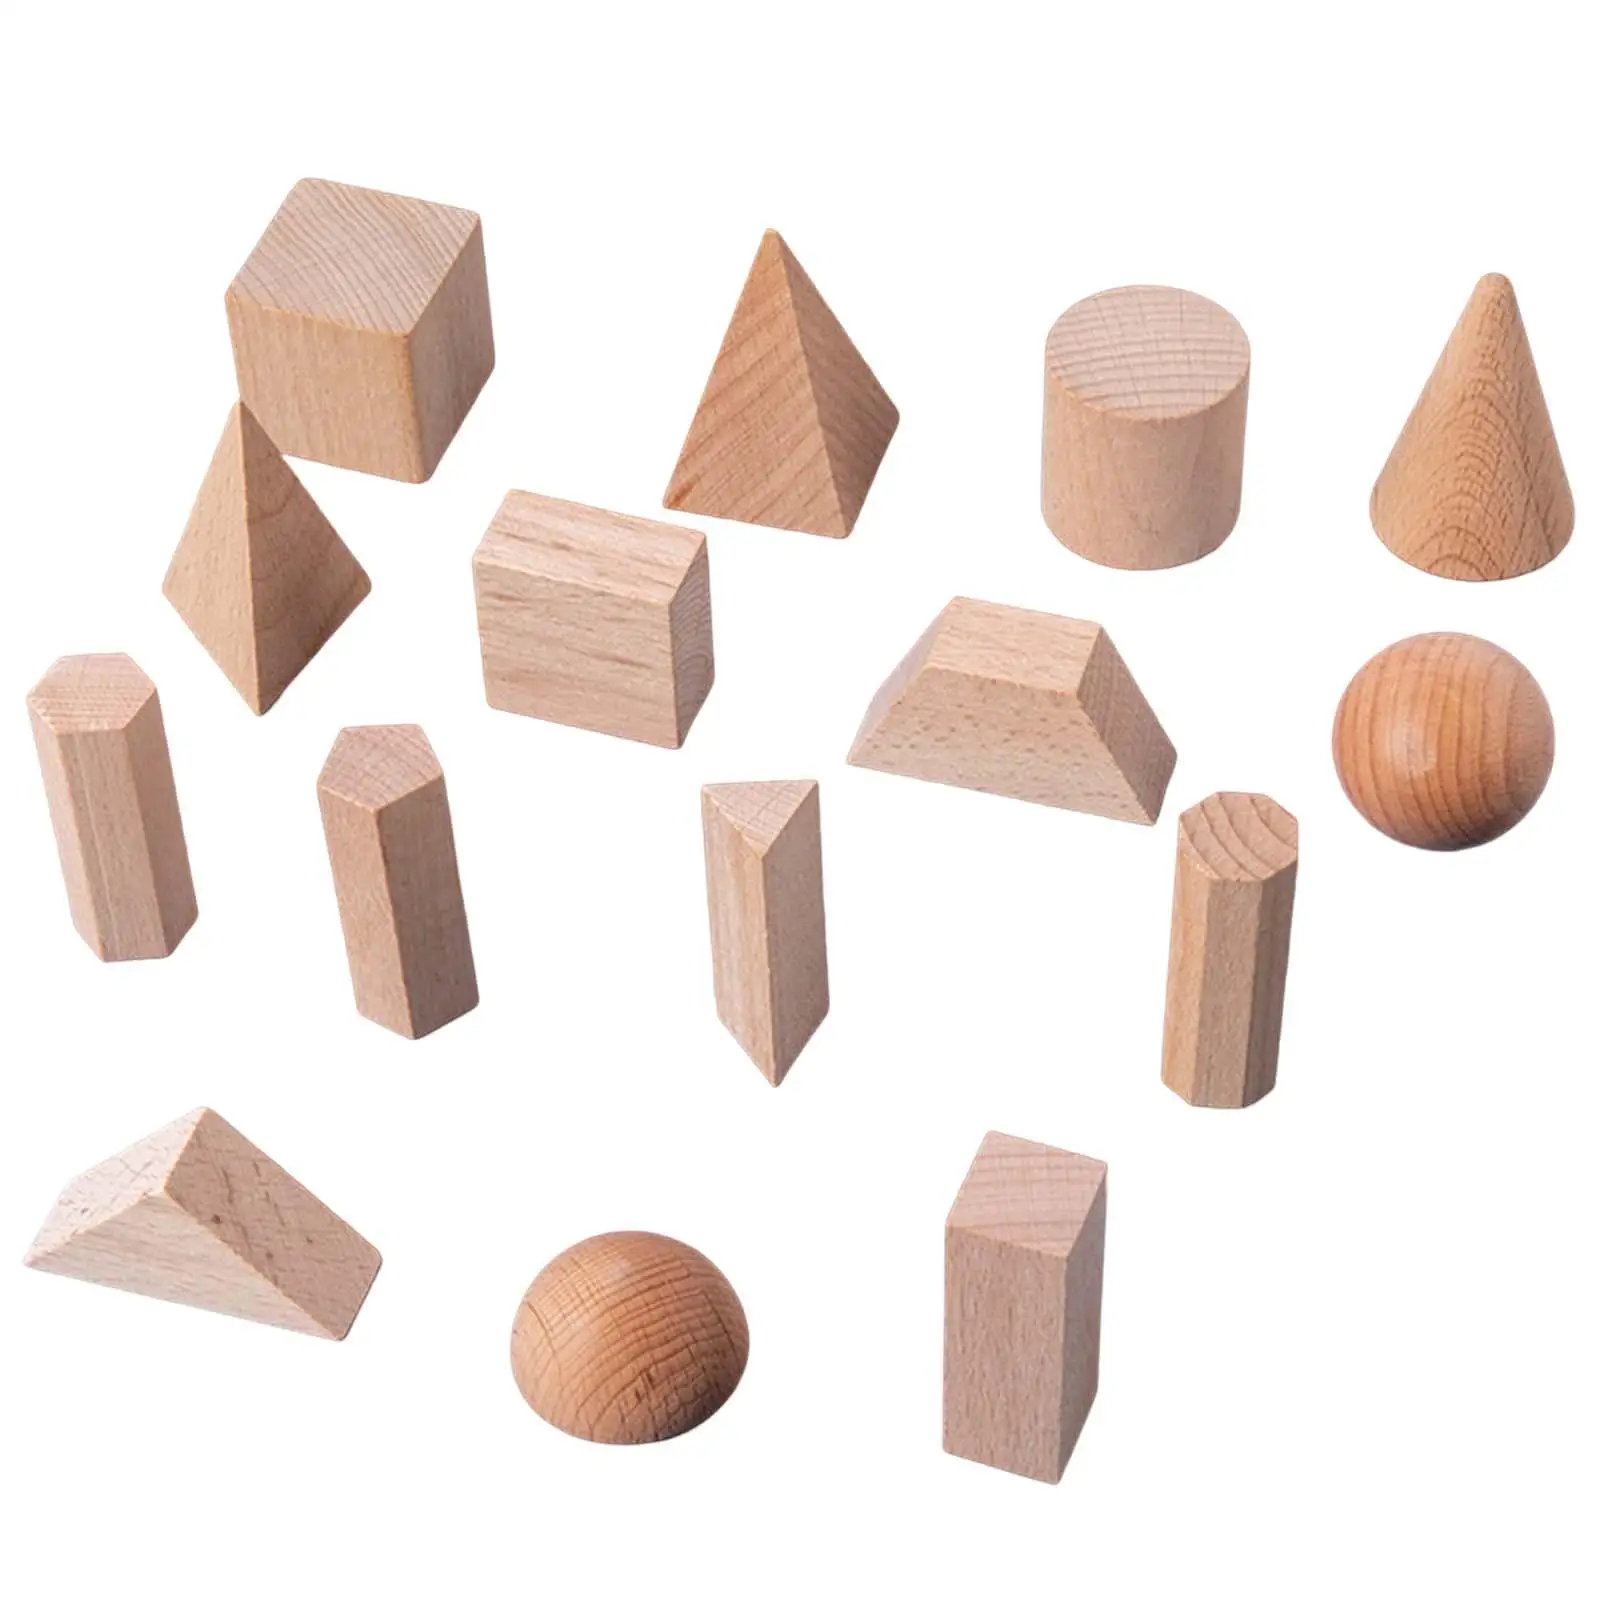 15 Pieces Wooden Geometric Solid Blocks 3D Shapes Learning Education Math Toys for Ages 2+ Kids